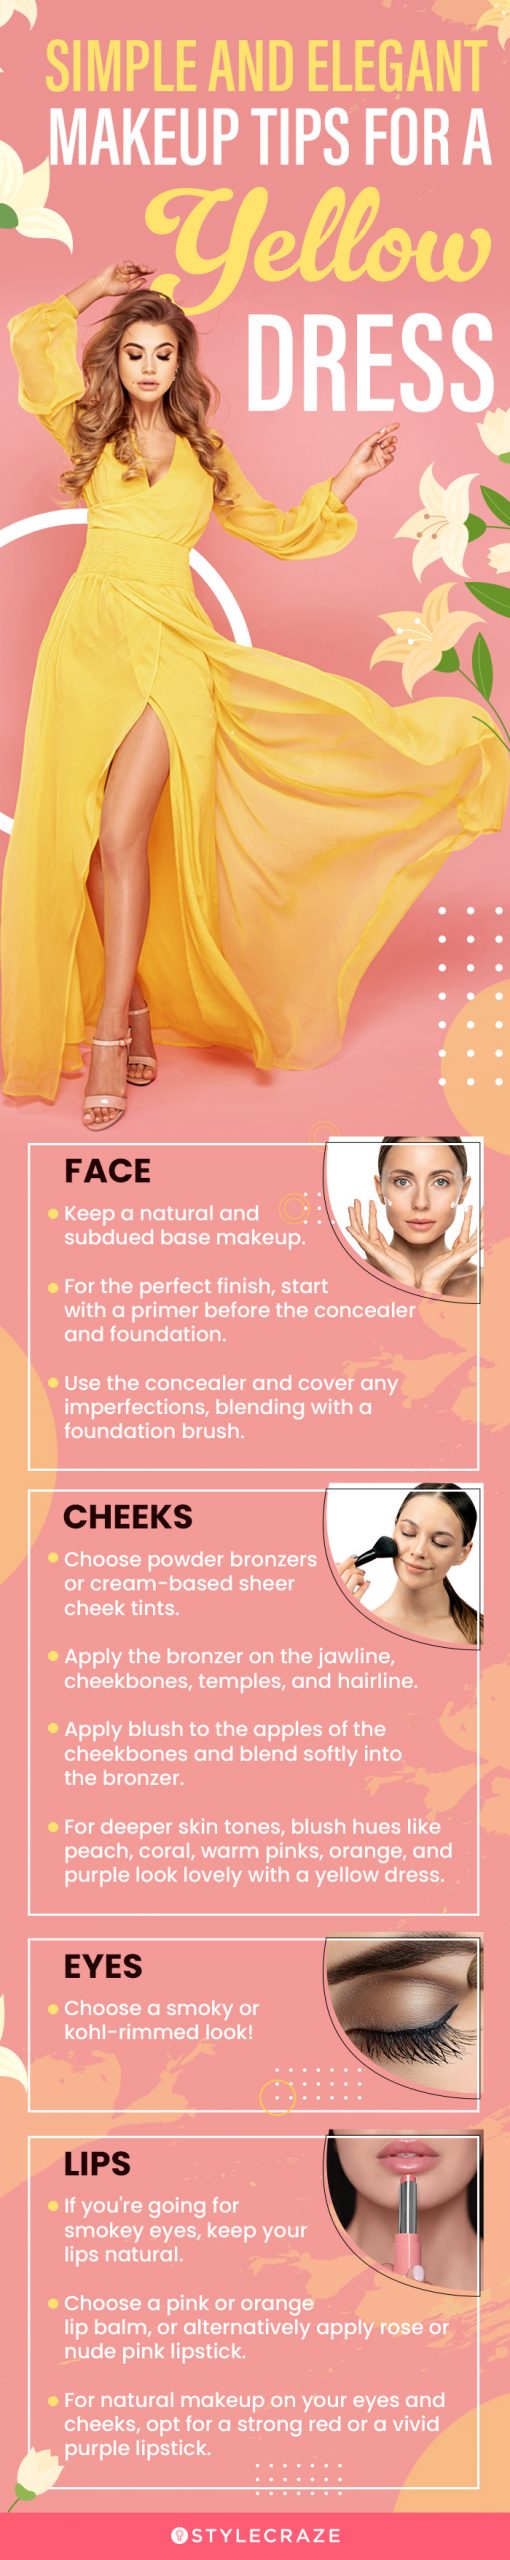 simple and elegant makeup tips for a yellow dress (infographic)